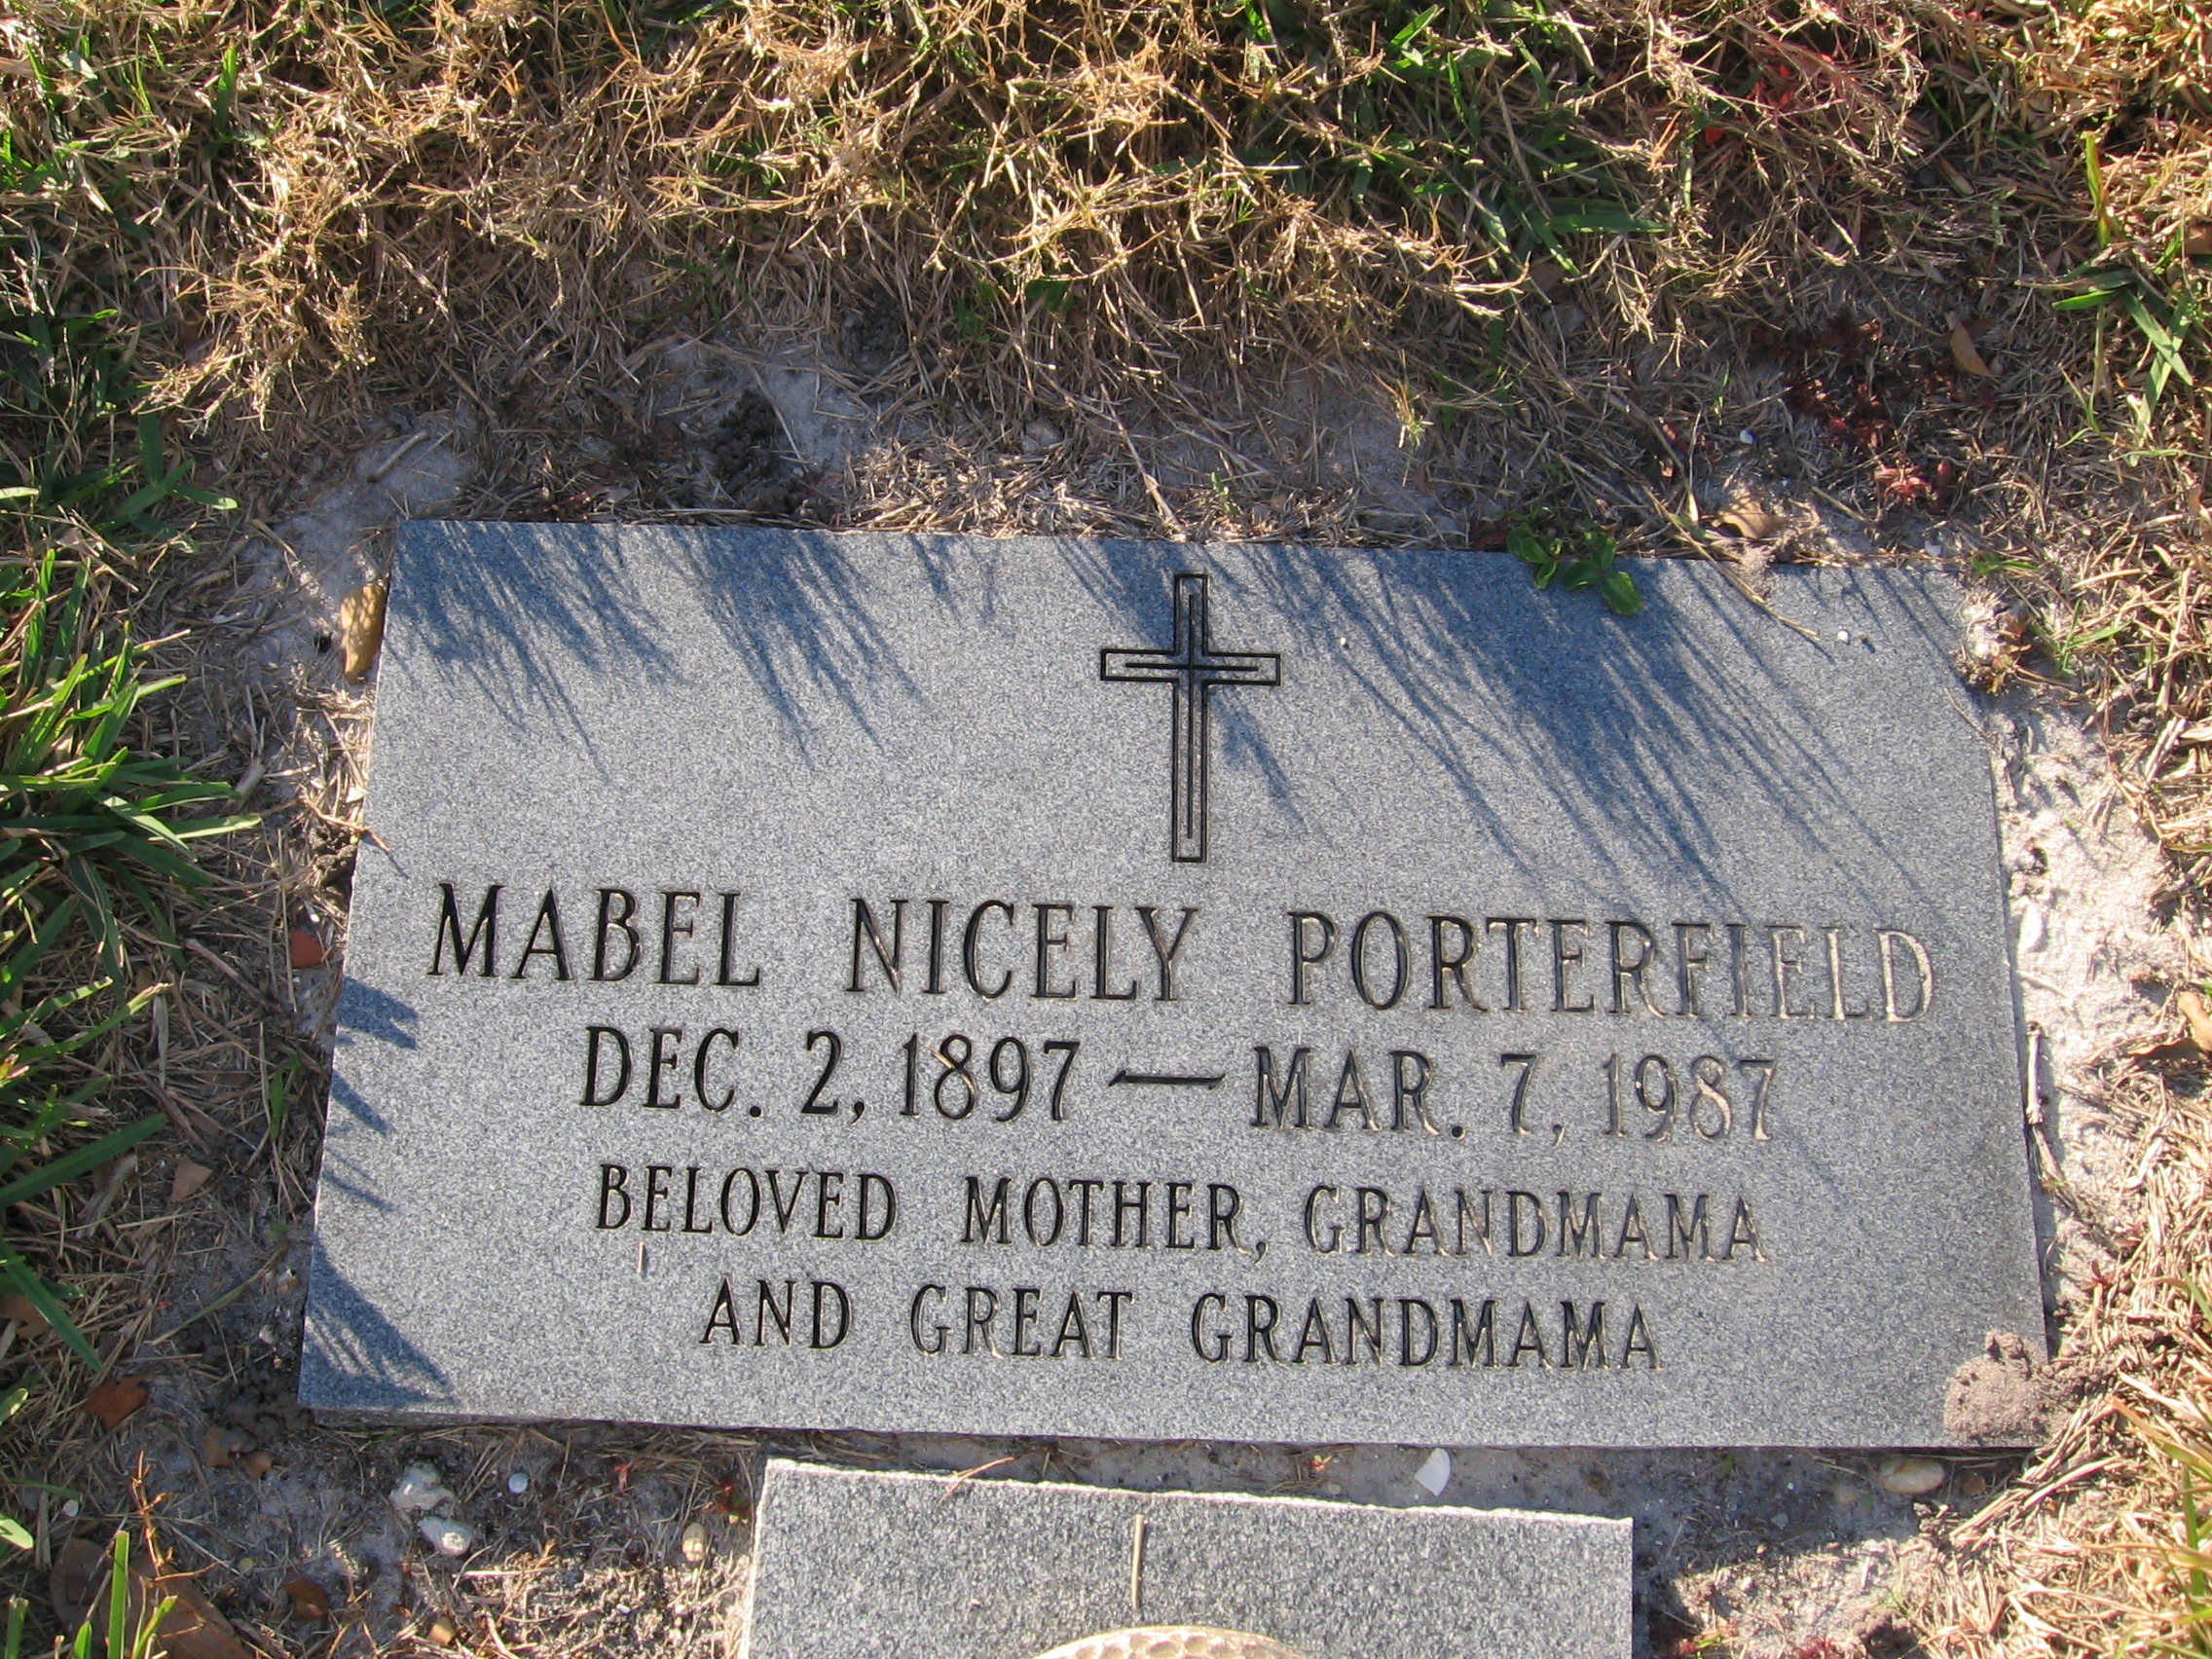 Mabel Nicely Porterfield